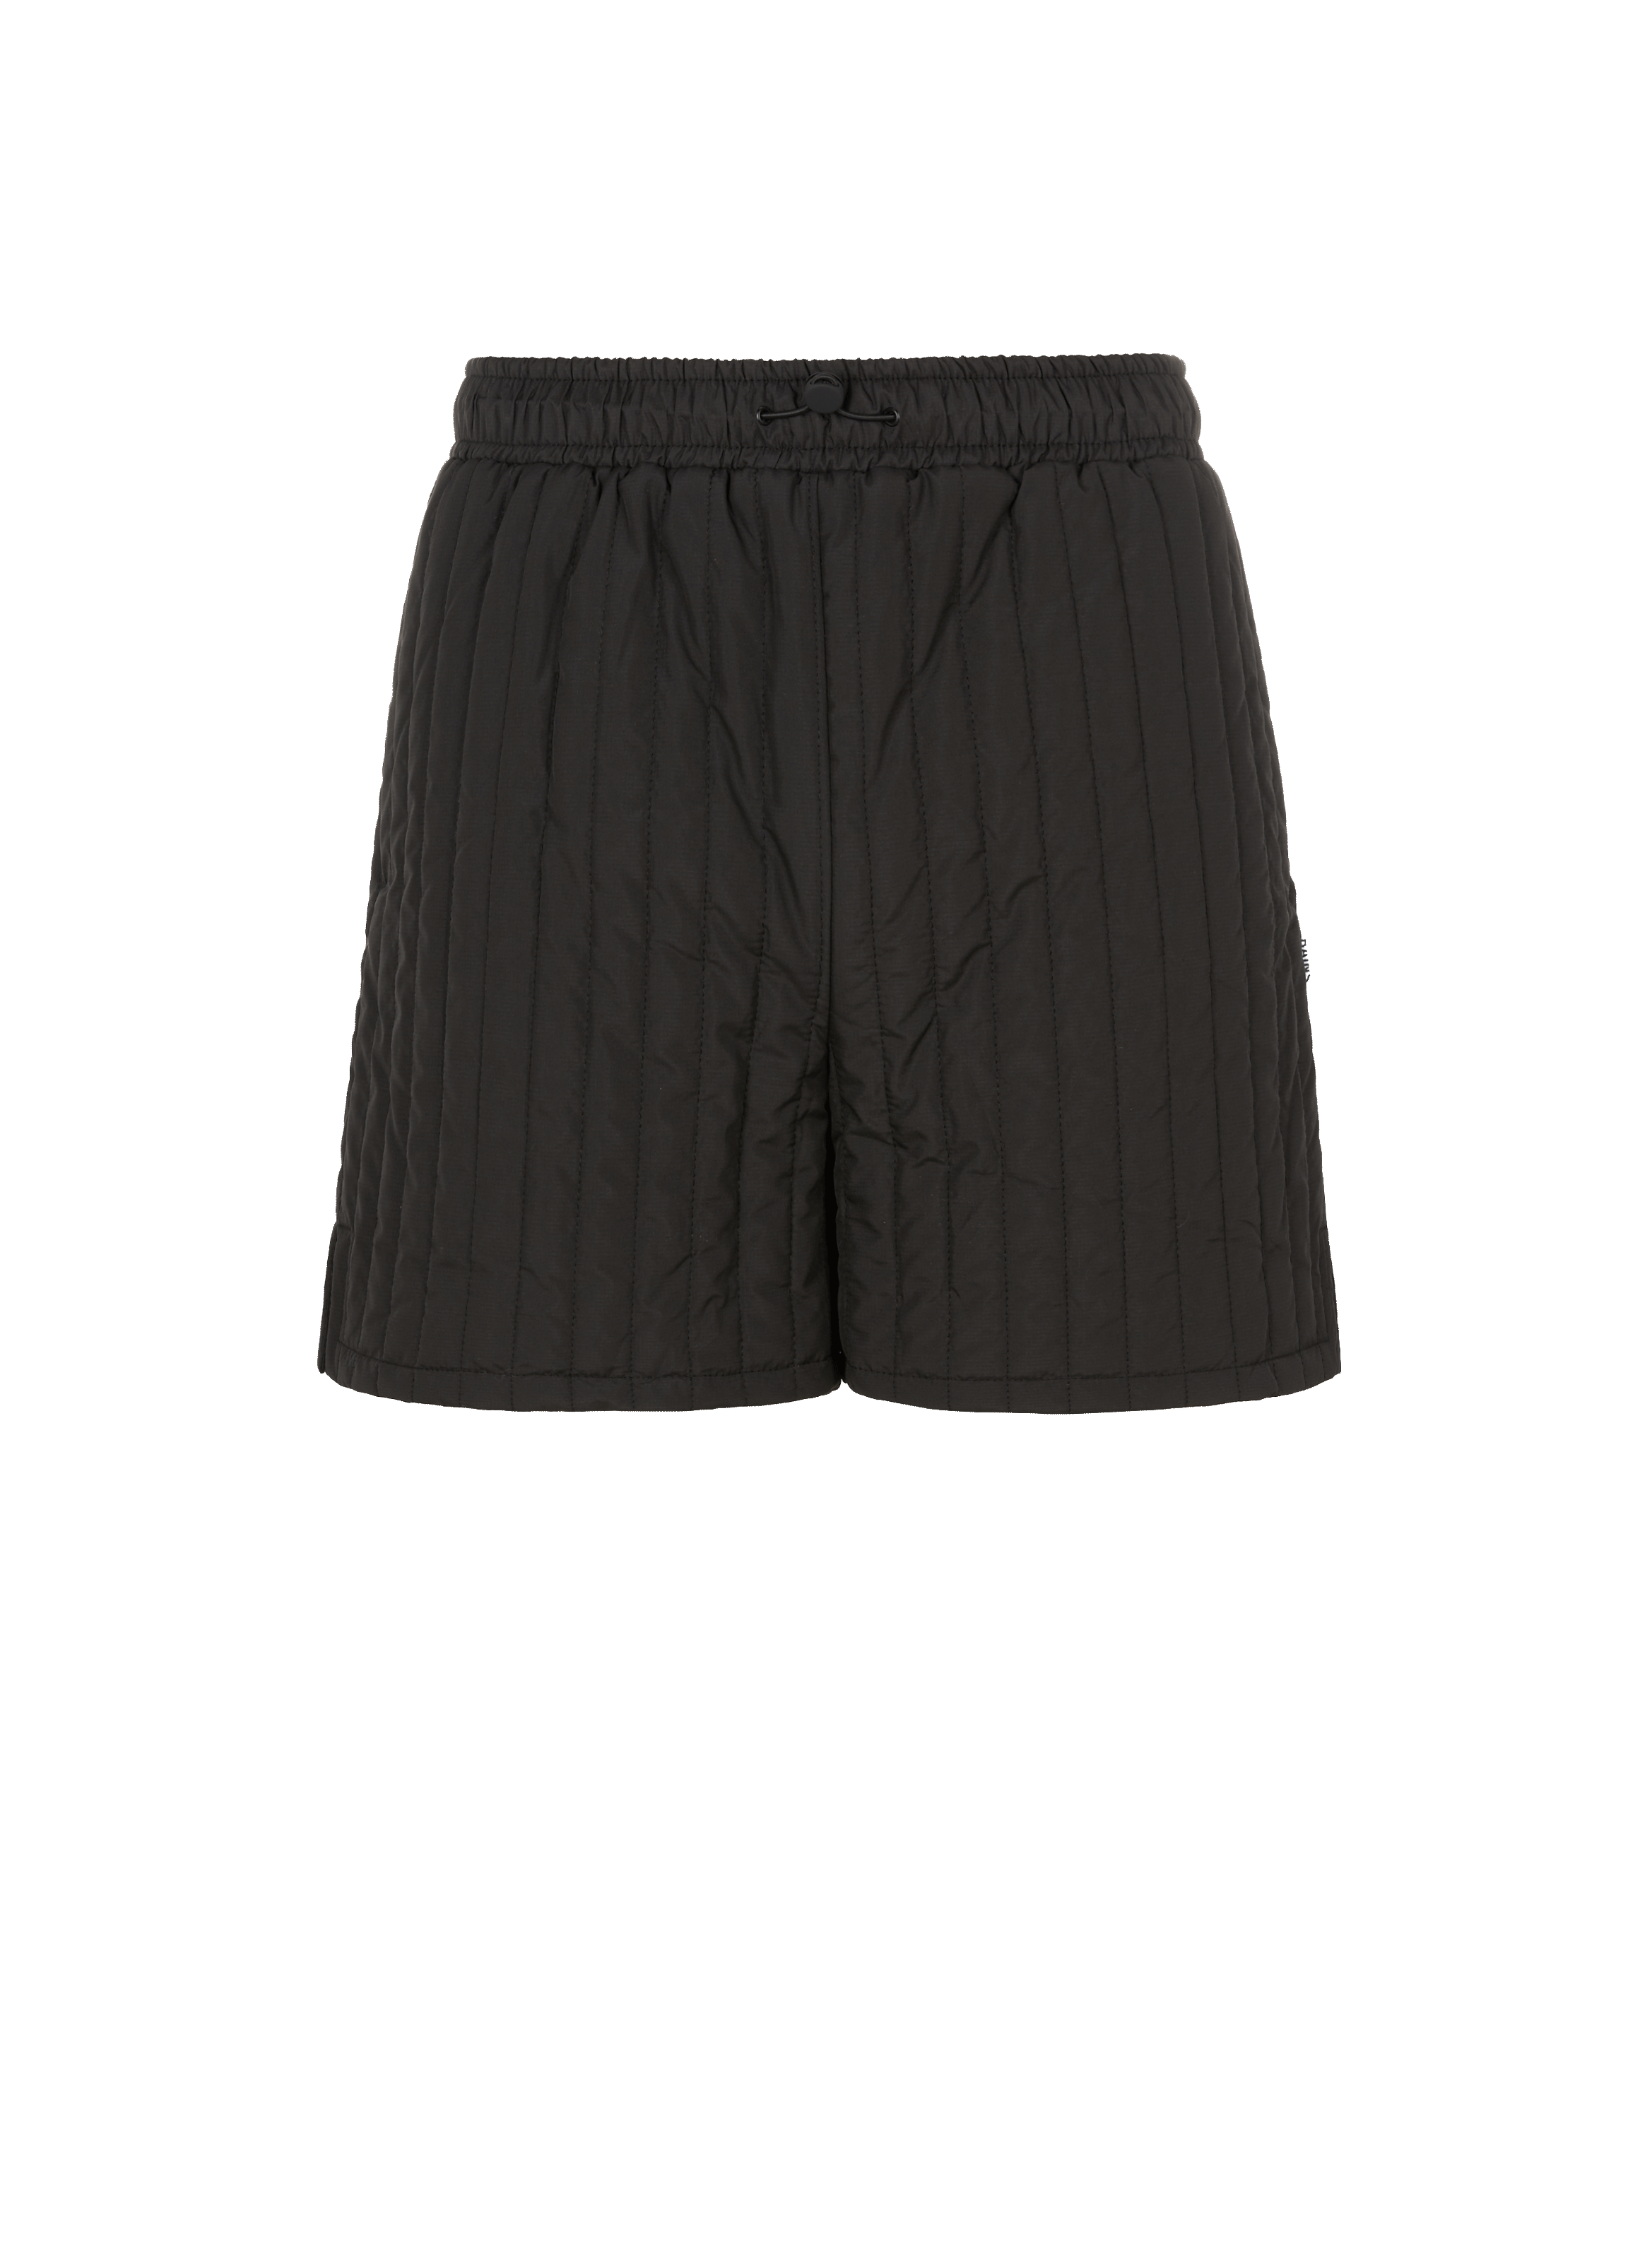 Rains Quilted Shorts in Black for Men Mens Shorts Rains Shorts 